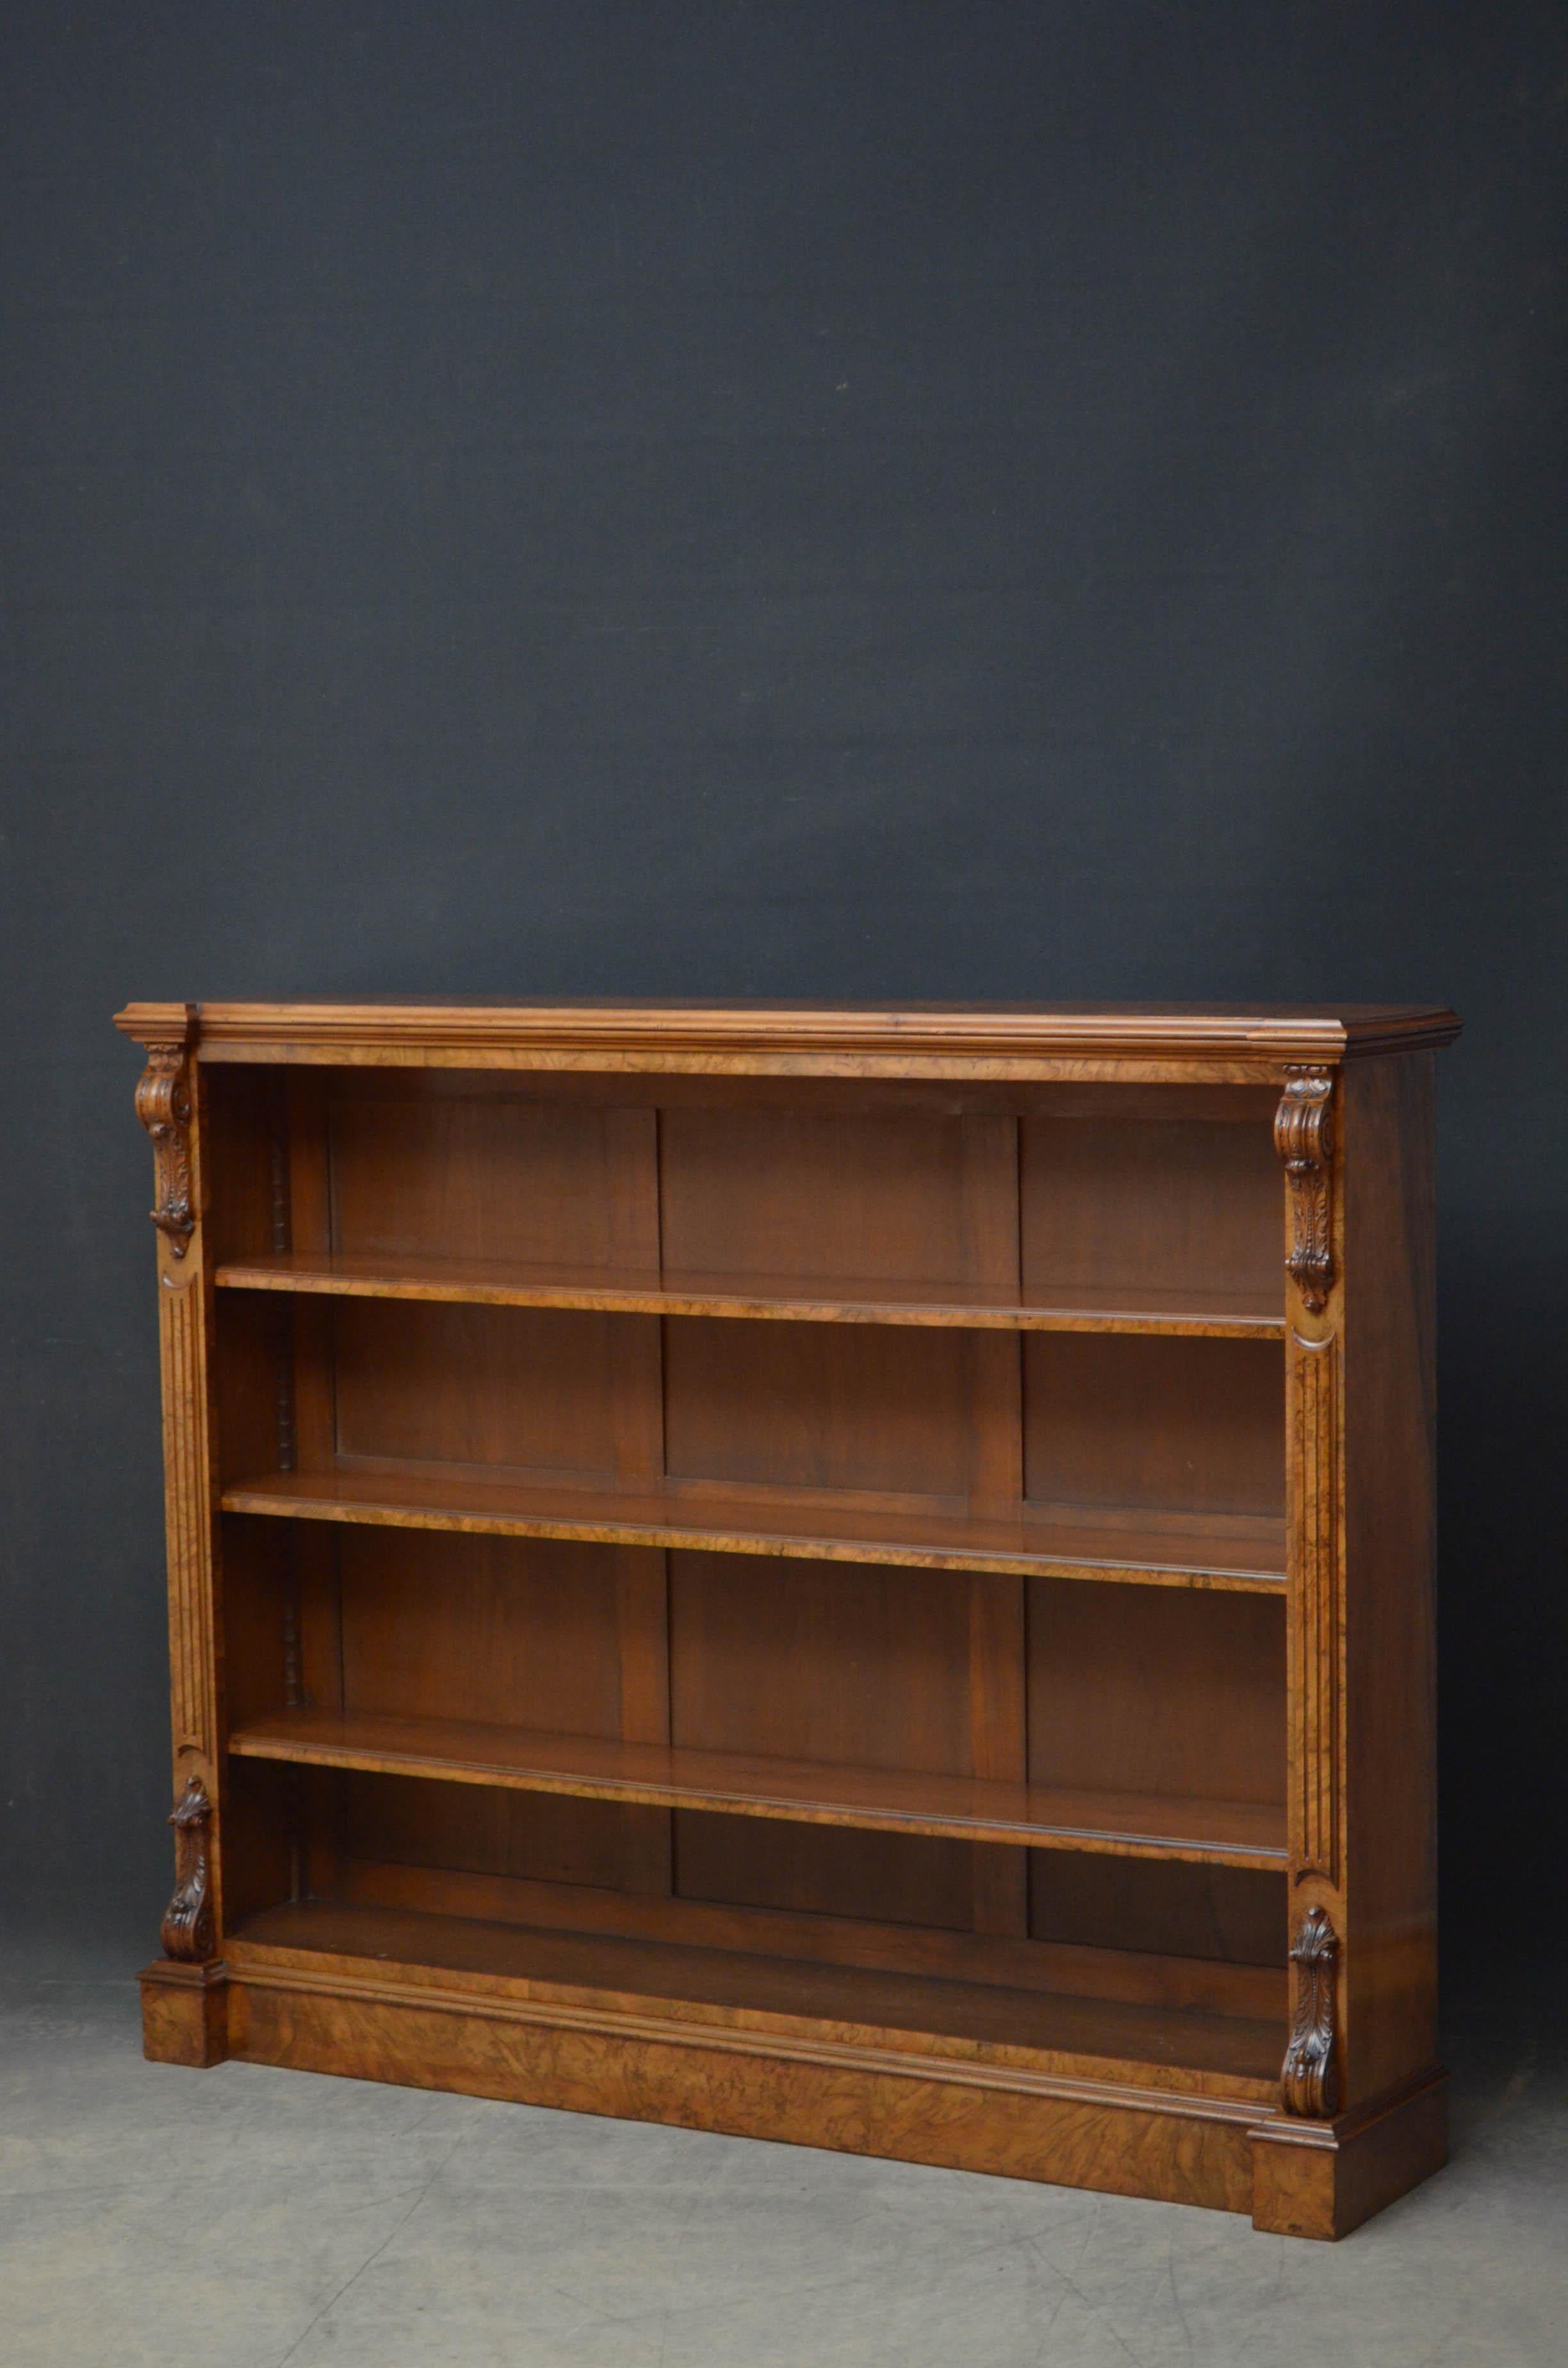 Sn5212 Superb quality Turner, Son & Walker open bookcase in walnut, having burr walnut top above three height adjustable shelves flanked by reeded pilasters with finest quality drop carvings to the top and base, all standing on moulded plinth. This